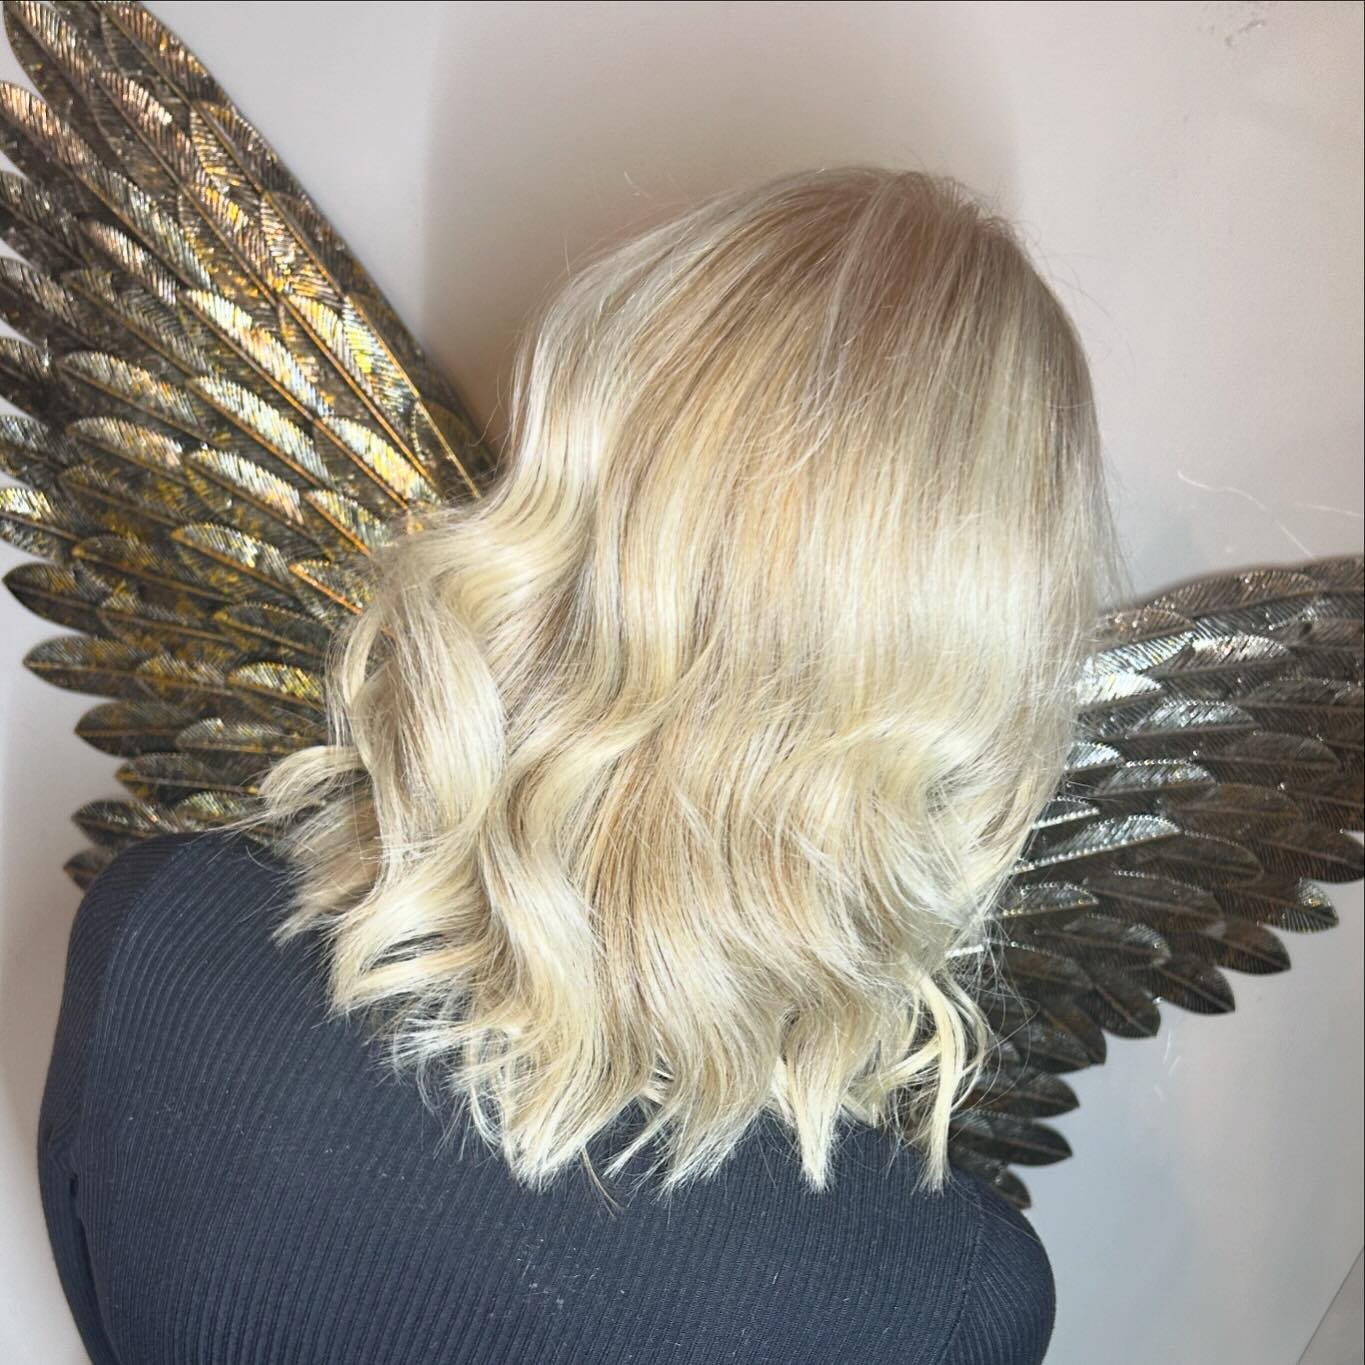 🙏🏻✨ love a good chop &amp; change ! 

Something liberating about trying something &ldquo;new&rdquo; 

Are you brave enough to ditch the long extensions and the ash cool blondes for a warmer shade 🤷🏼&zwj;♀️

#shortextensions #swayhair#weave#blonde